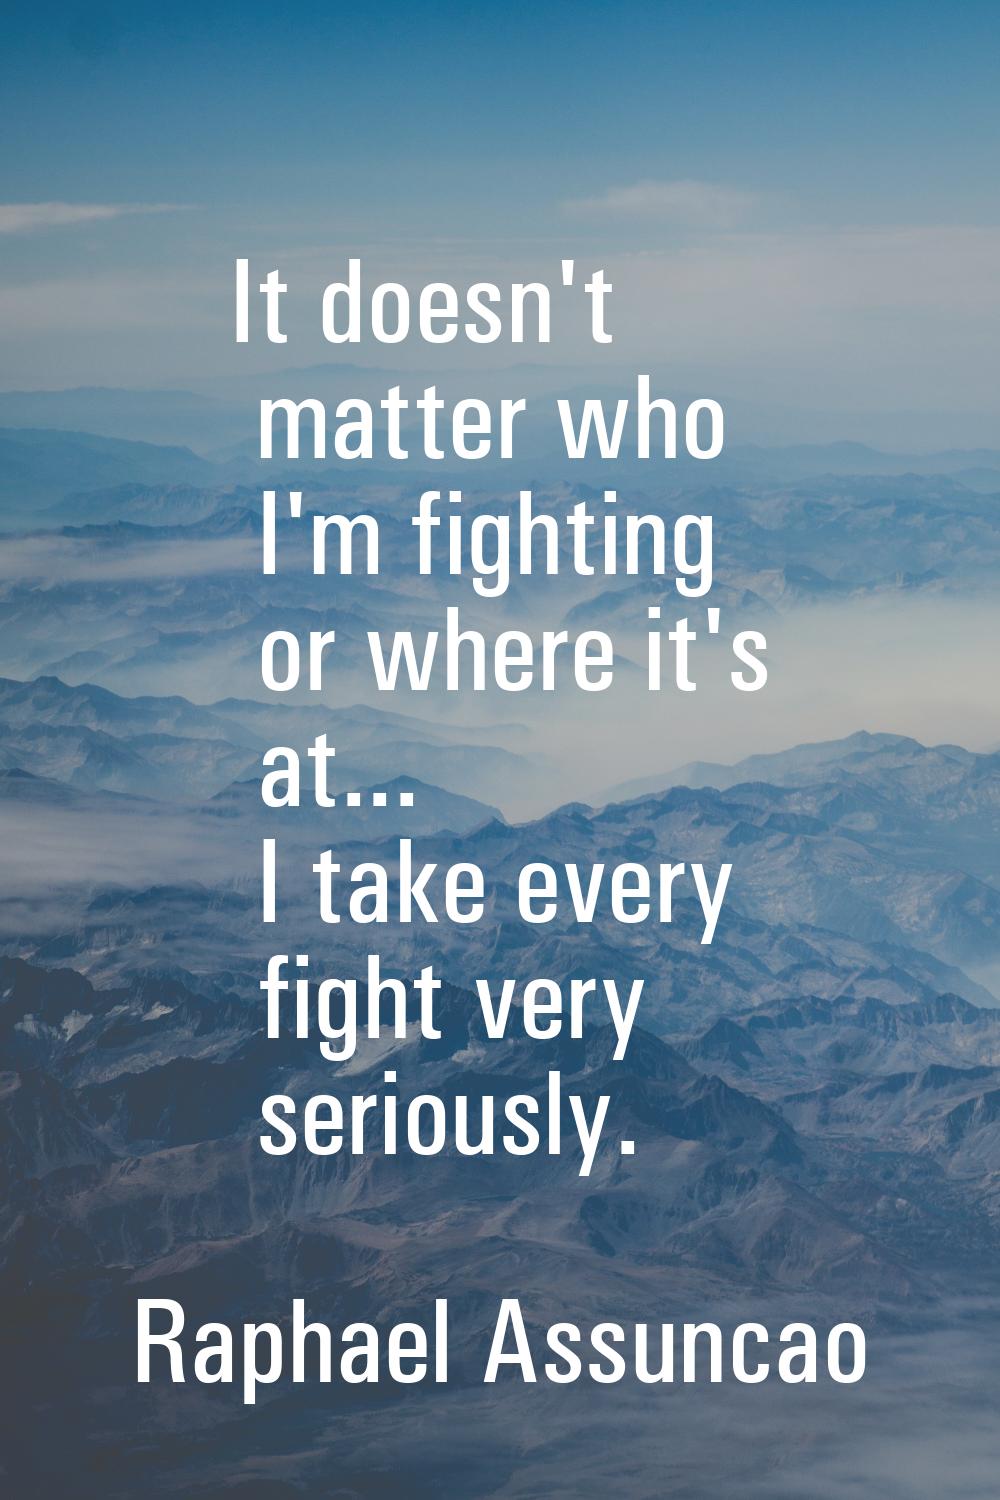 It doesn't matter who I'm fighting or where it's at... I take every fight very seriously.